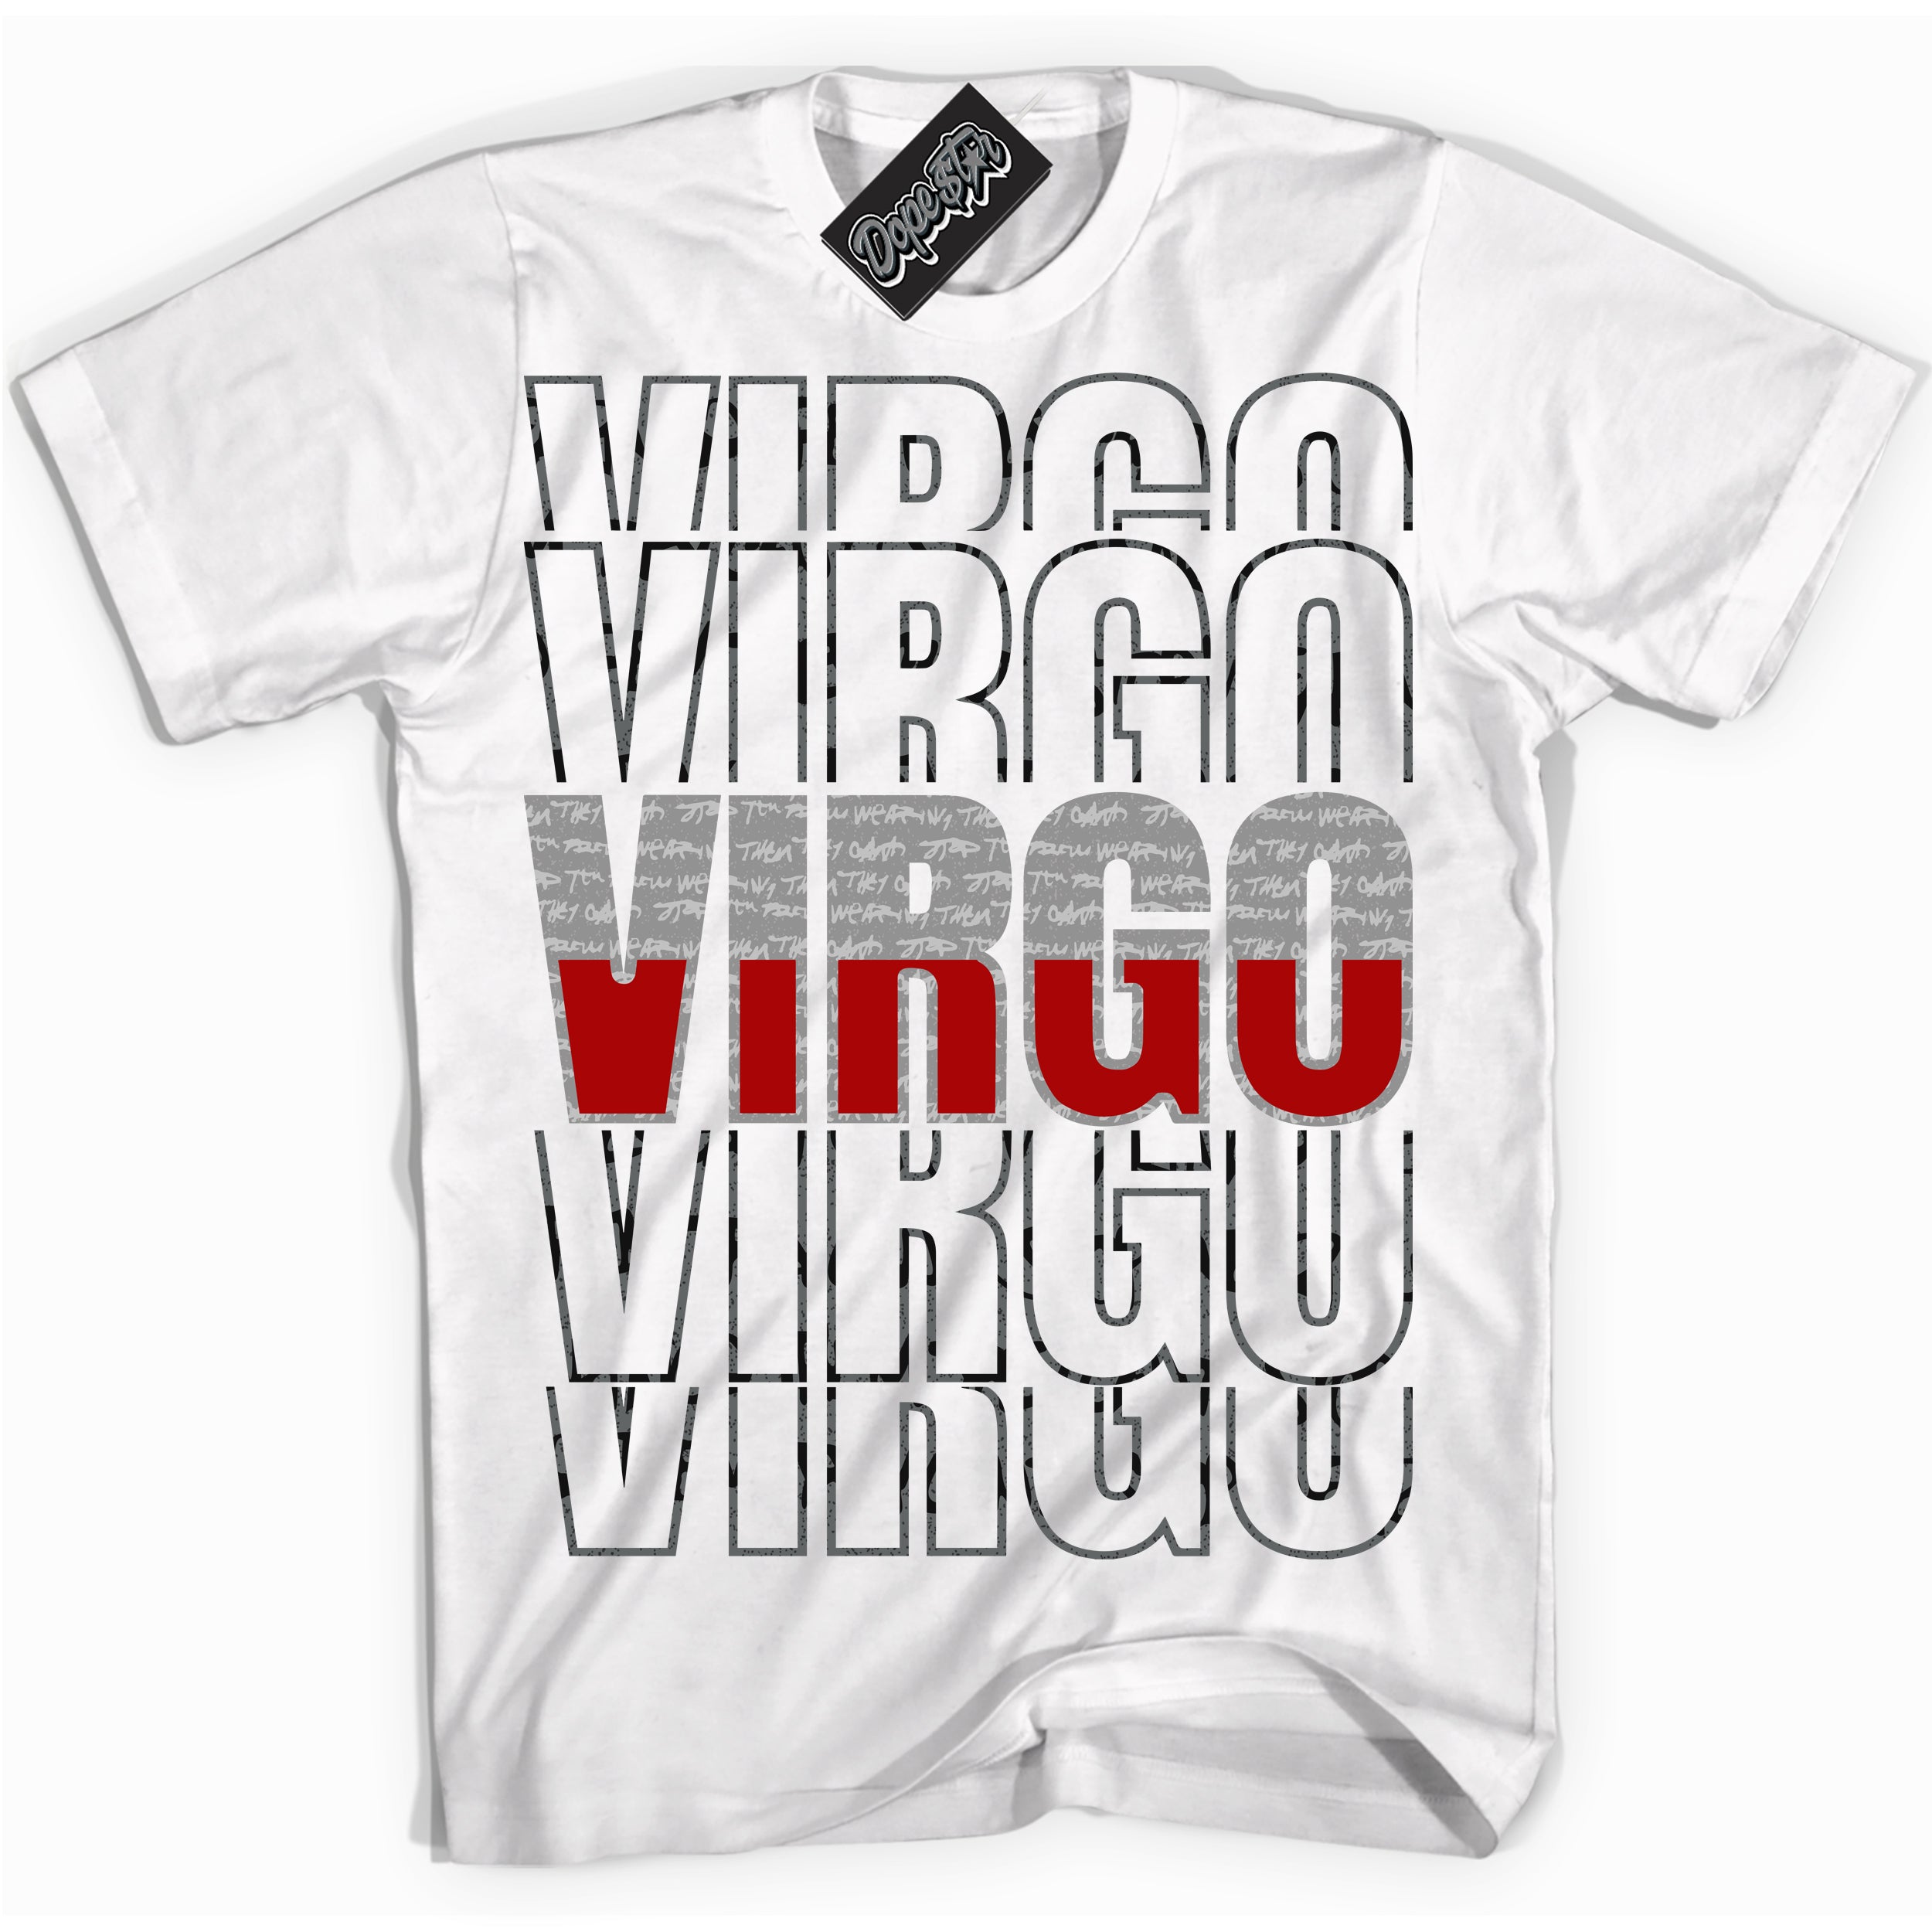 Cool White Shirt with “ Virgo” design that perfectly matches Rebellionaire 1s Sneakers.